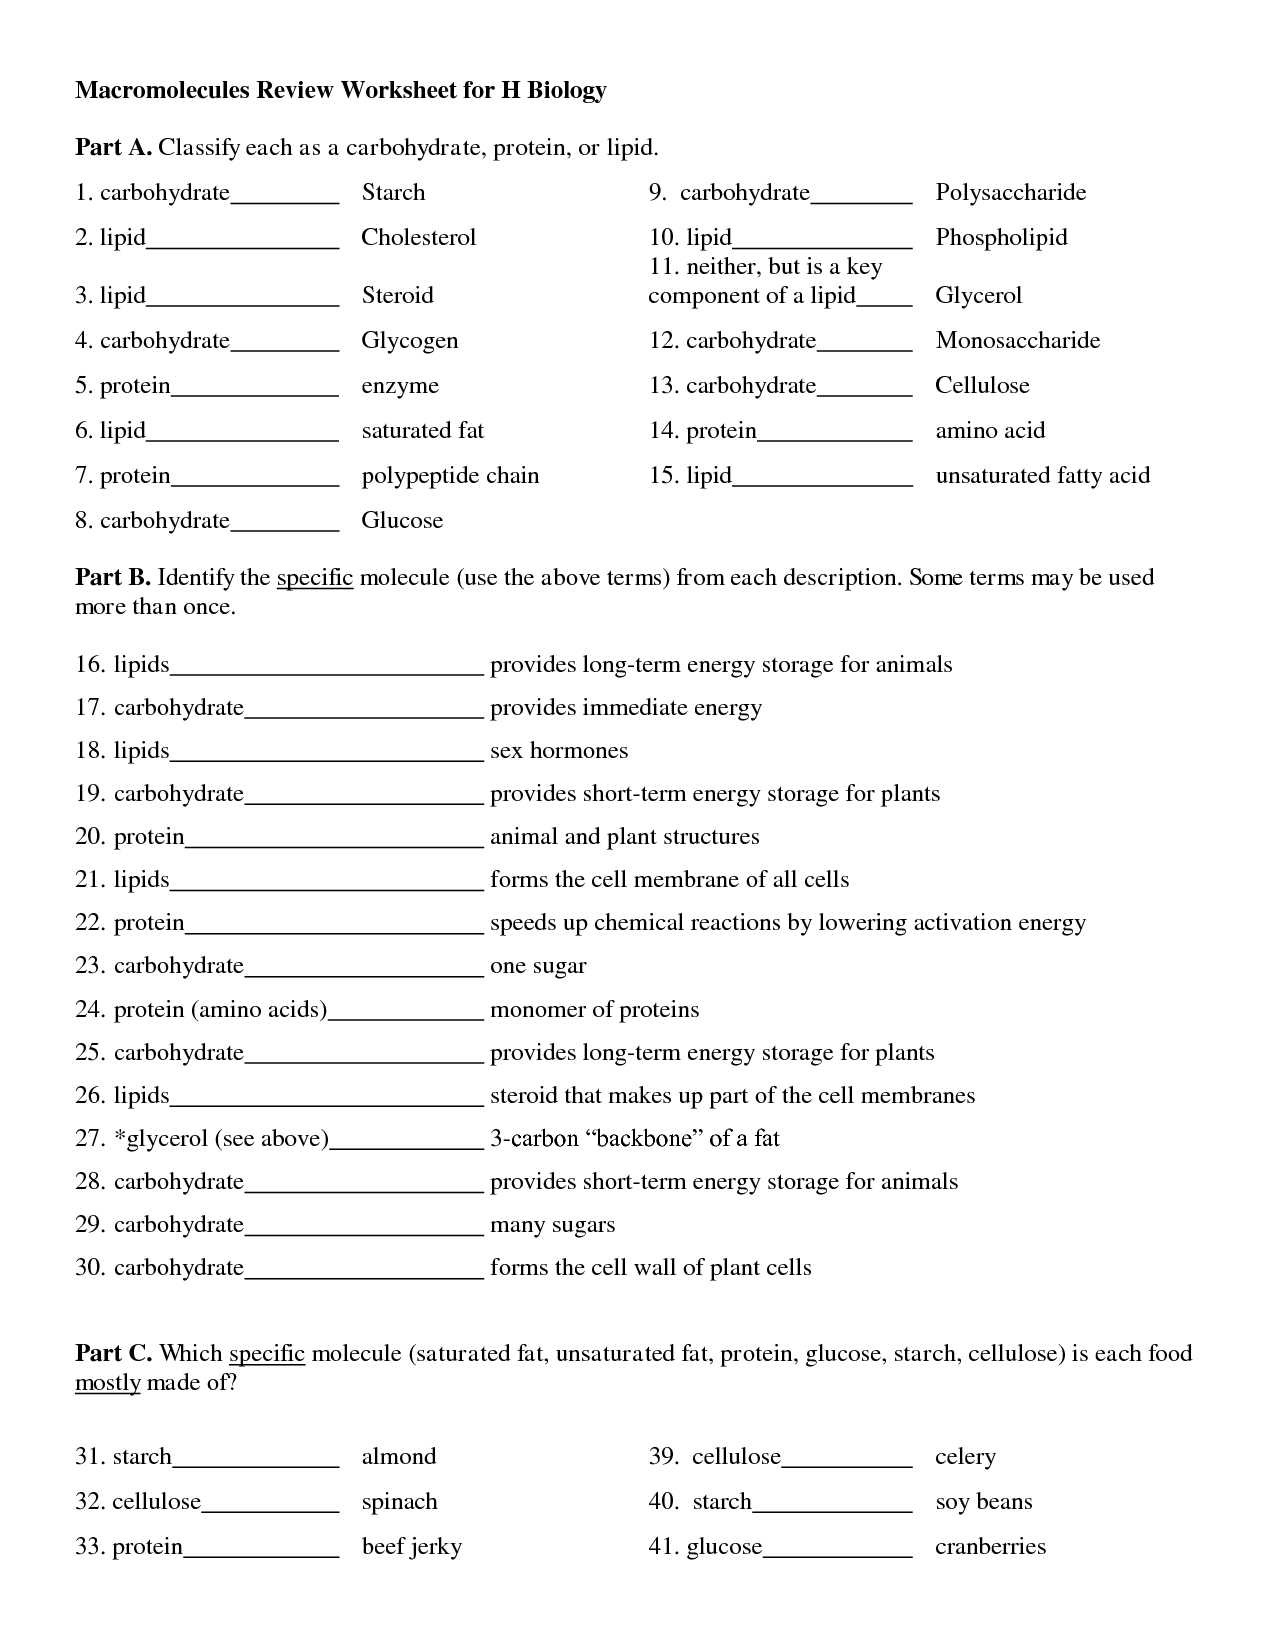 6th Grade Science Worksheets with Answer Key with Macromolecules Worksheet 2 Biology Macromolecules